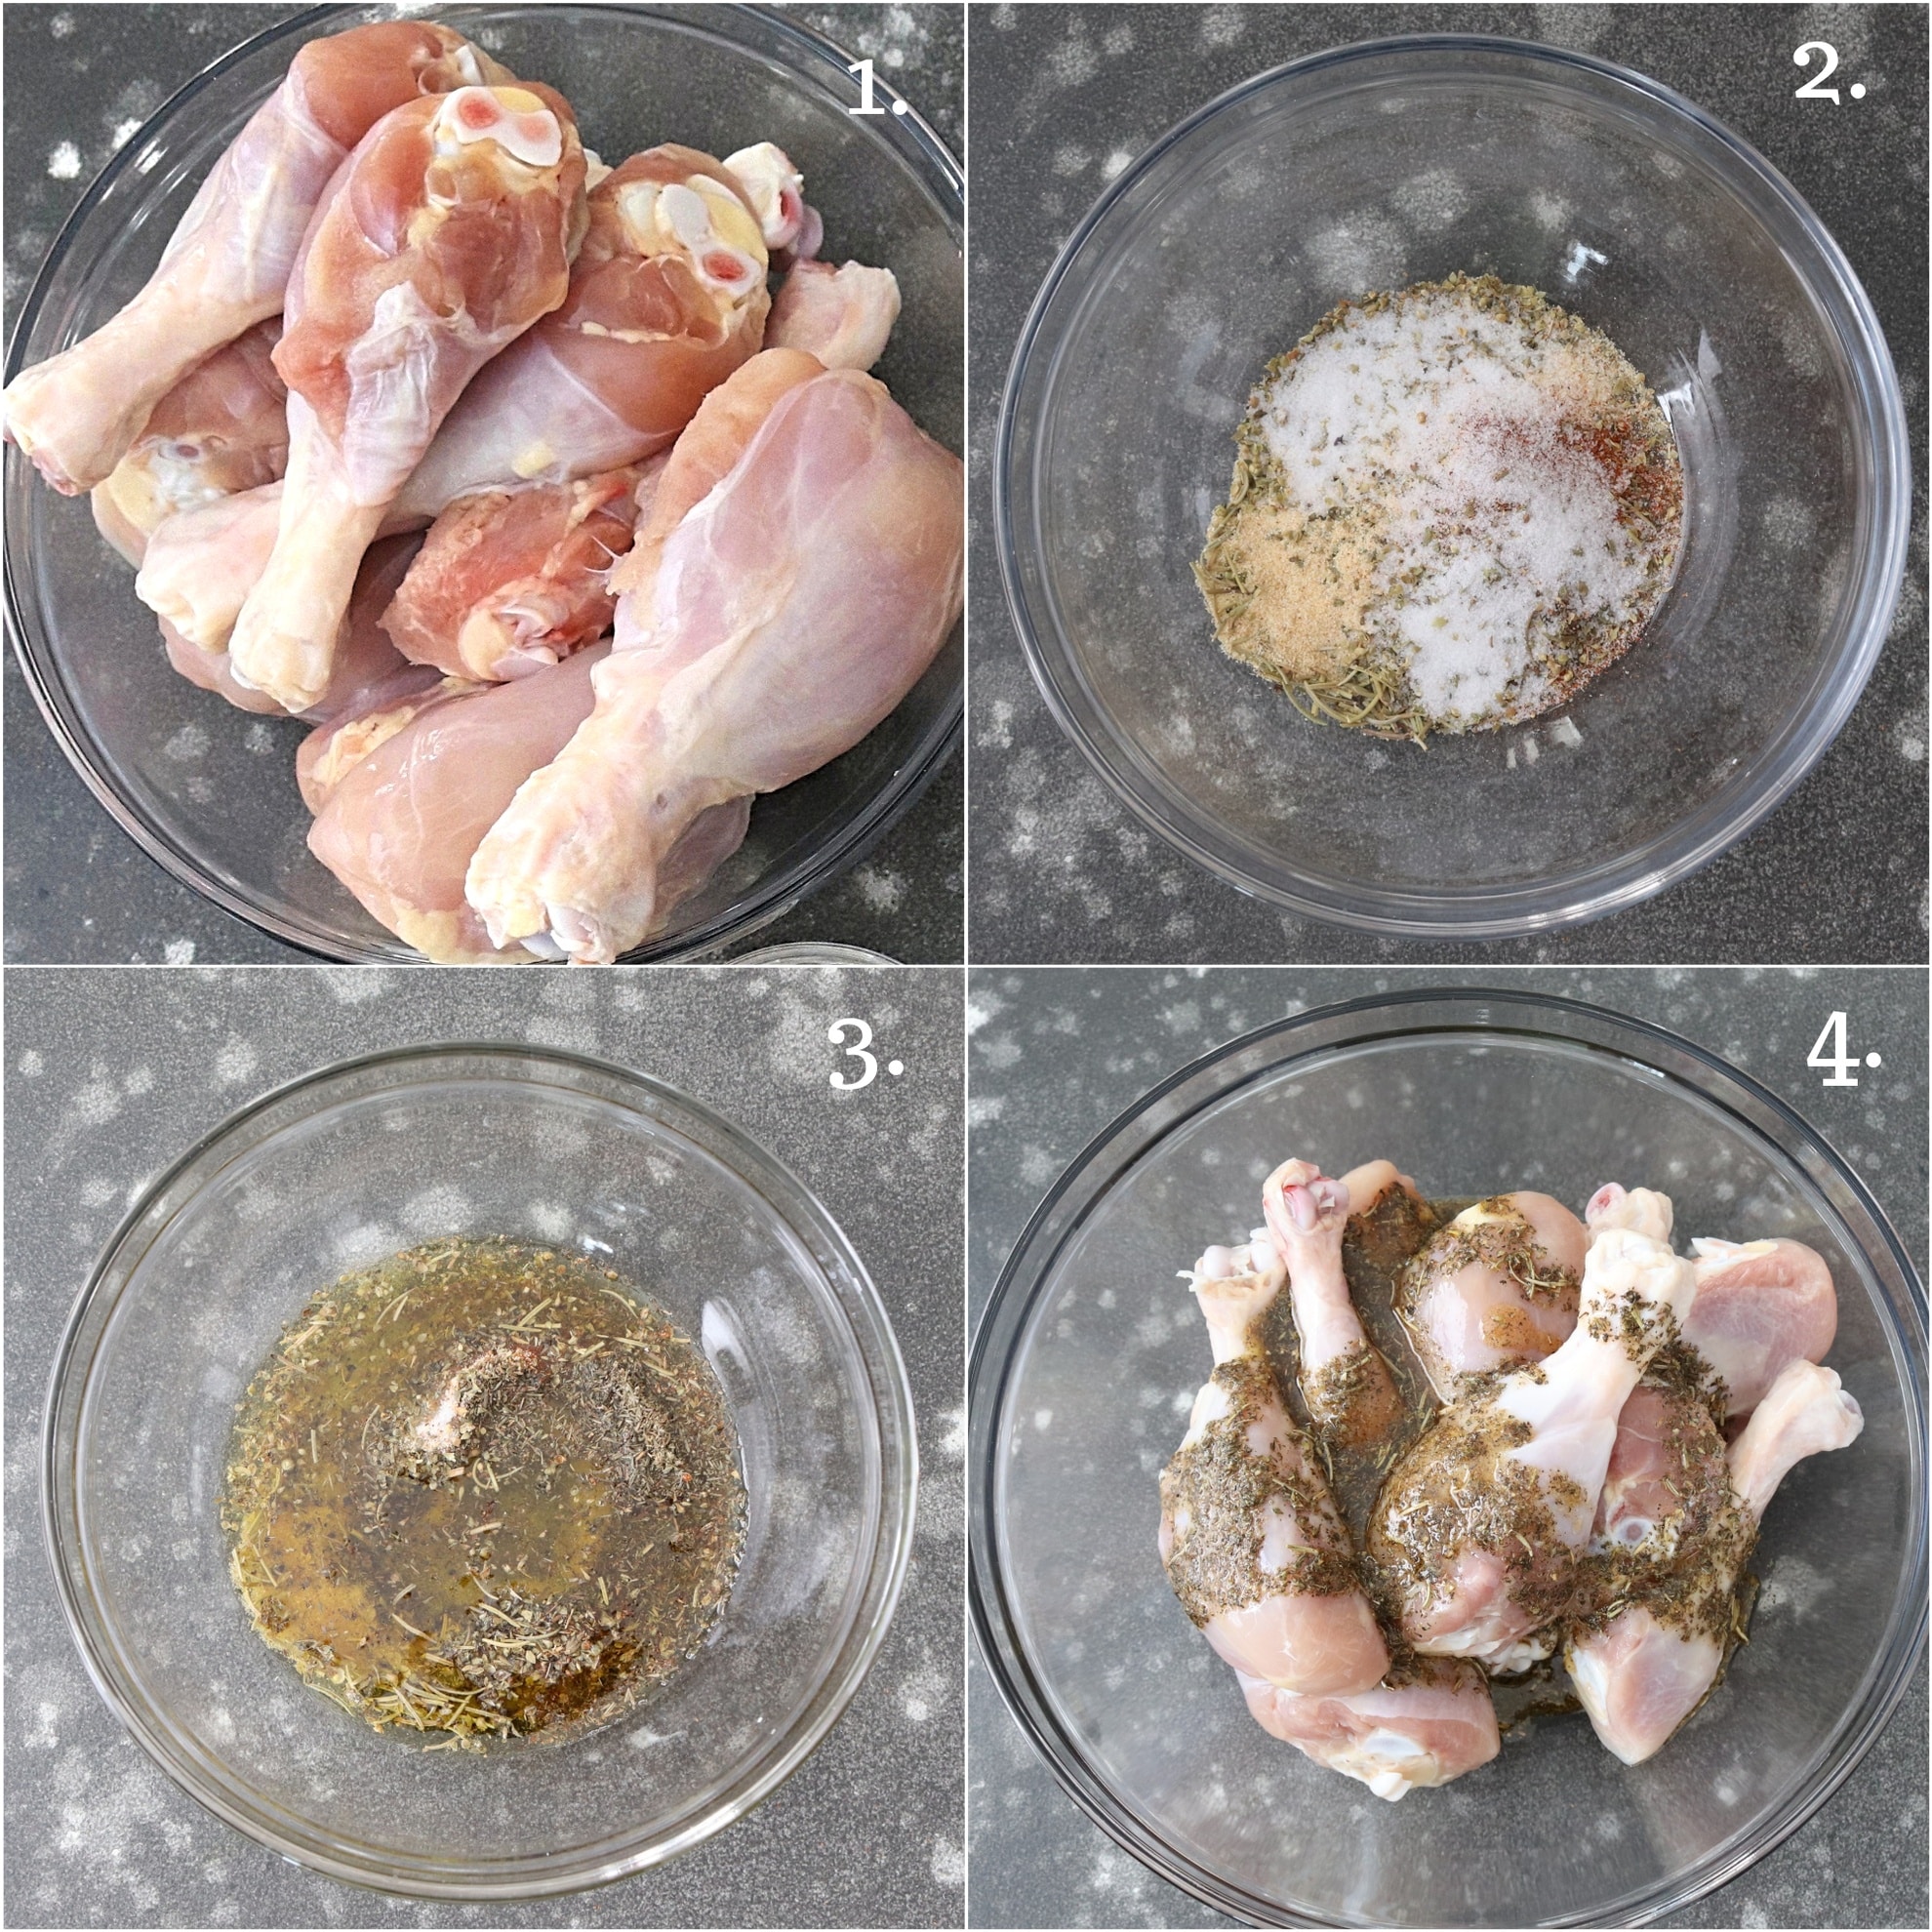 How to bake herb chicken